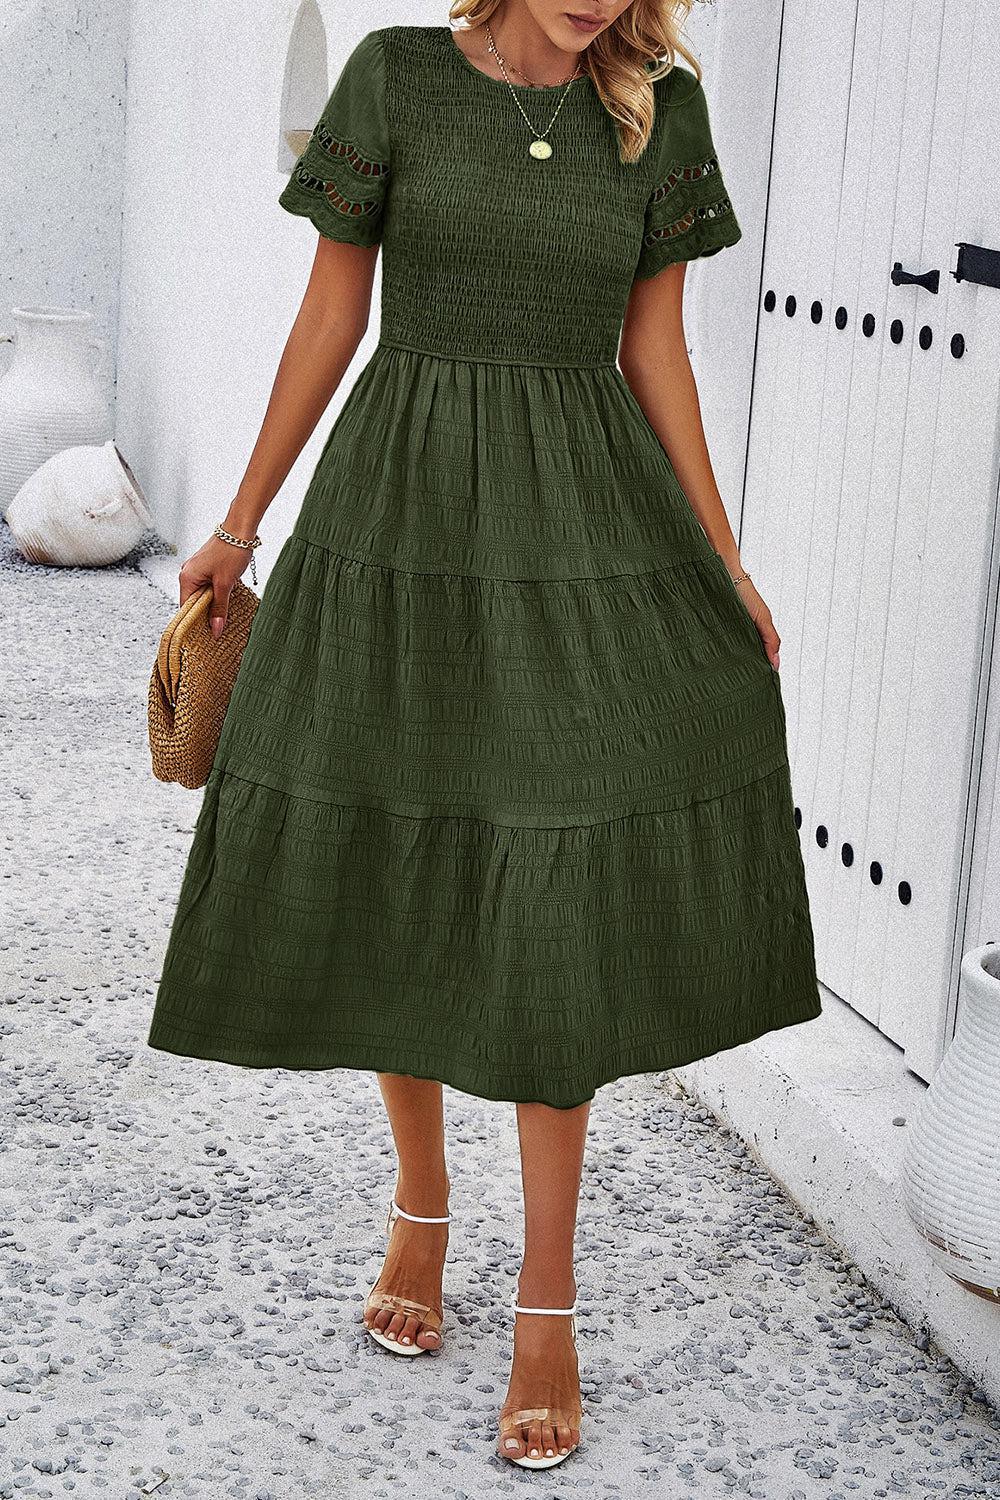 a woman in a green dress is standing outside